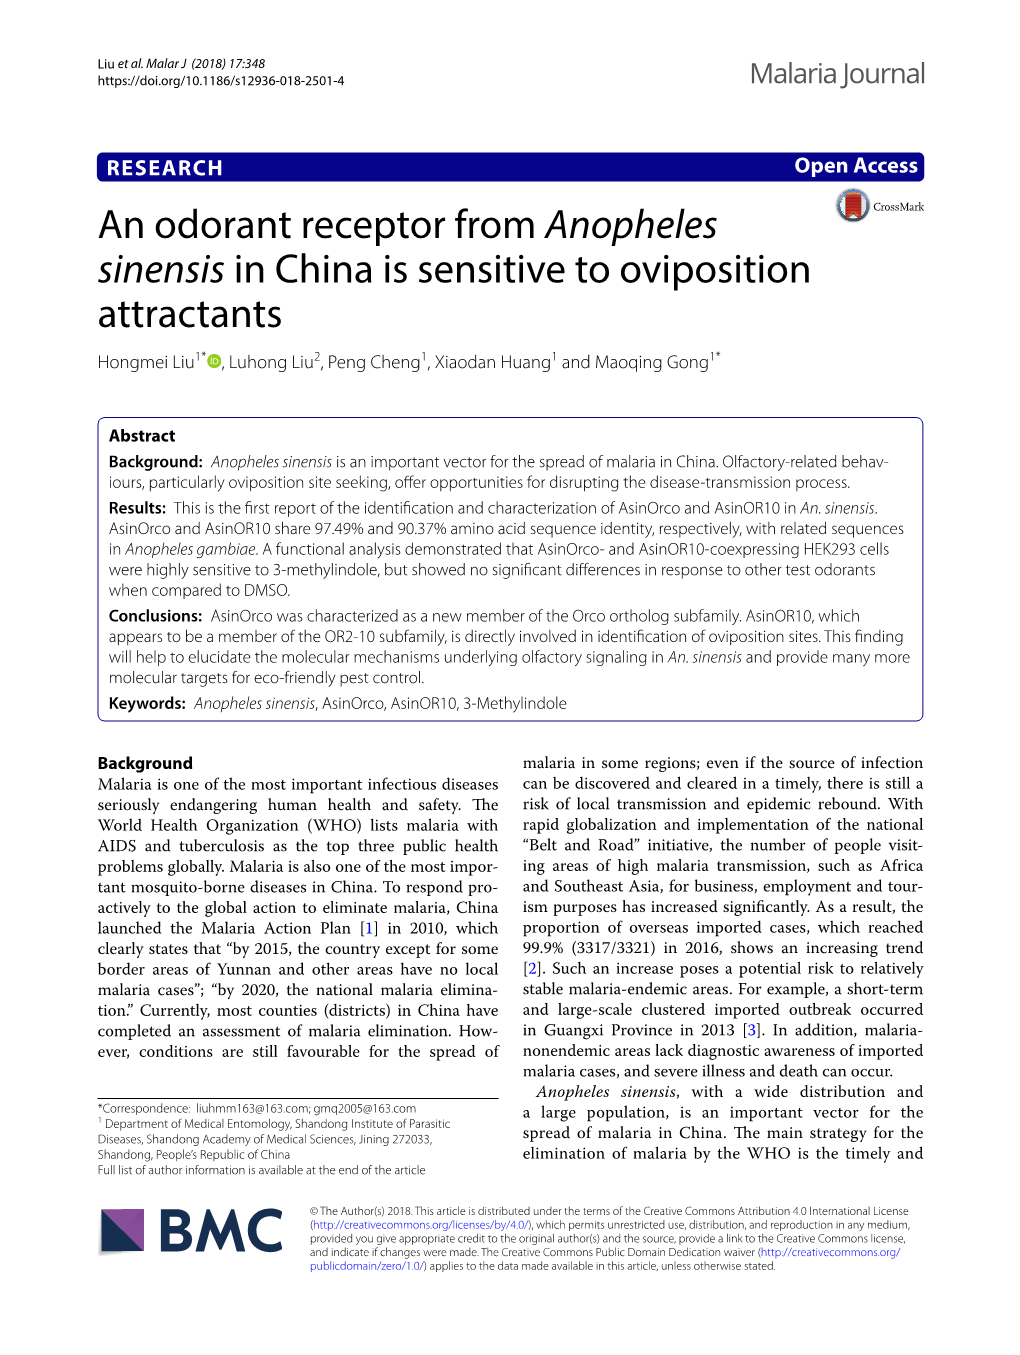 An Odorant Receptor from Anopheles Sinensis in China Is Sensitive To